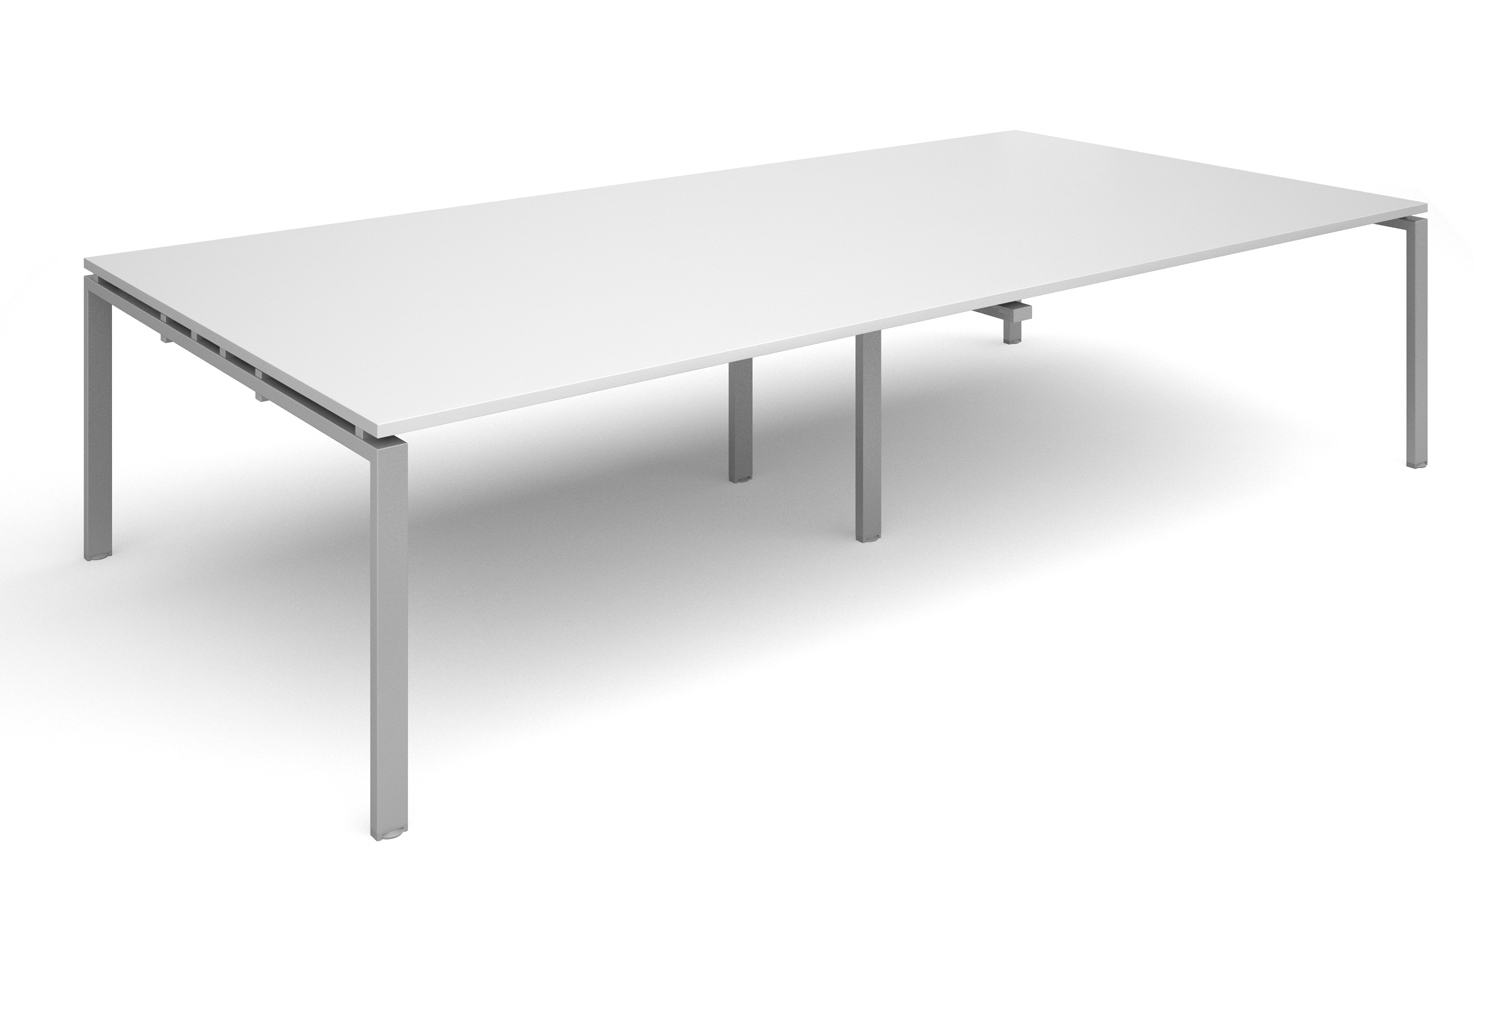 Prime Rectangular Boardroom Table (Silver Legs), 320wx160dx73h (cm), White, Fully Installed